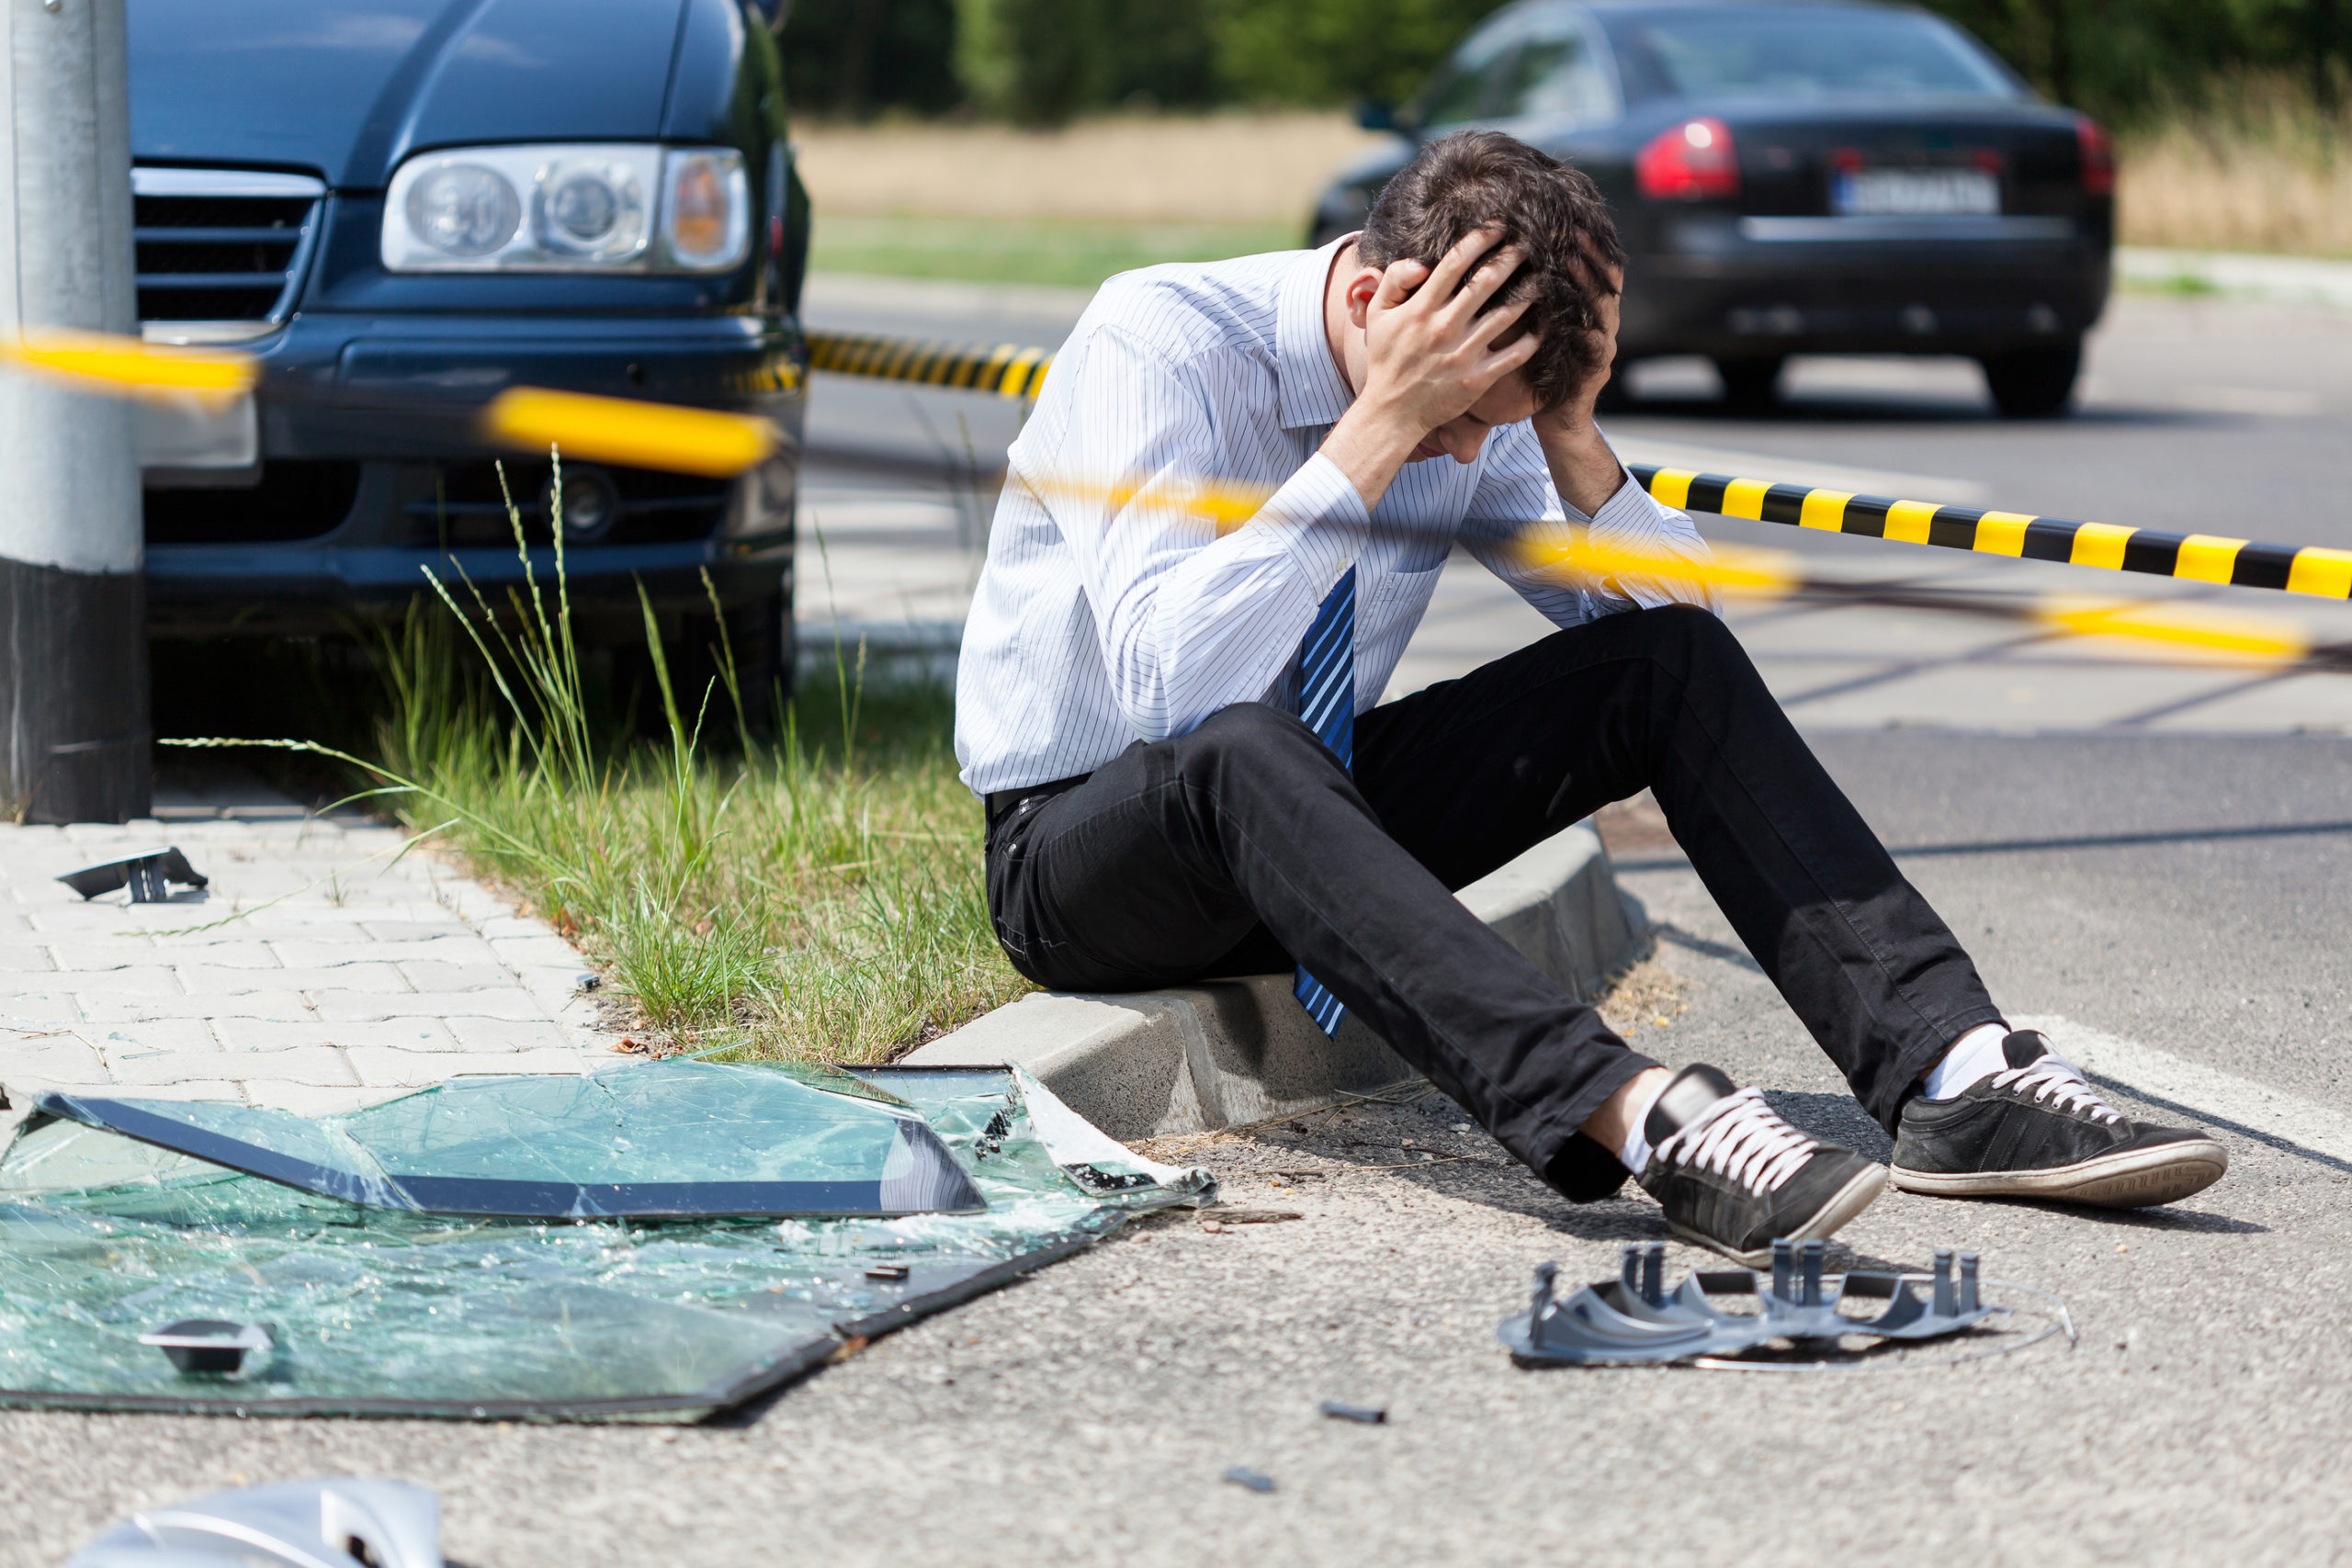 Why You Absolutely Must Stop Your Vehicle After a Car Wreck